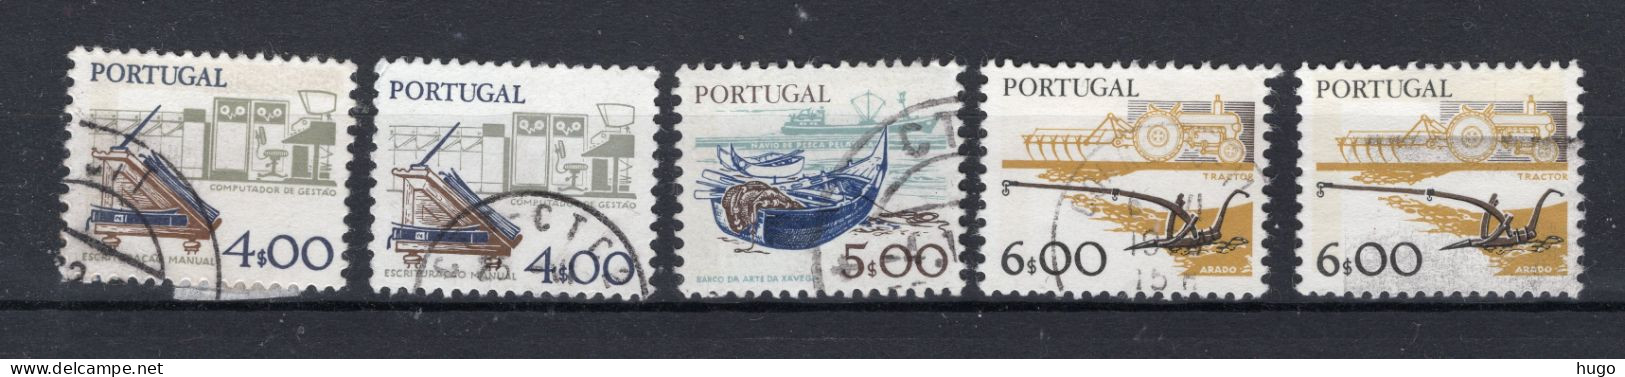 PORTUGAL Yt. 1368/1370° Gestempeld 1978 - Used Stamps